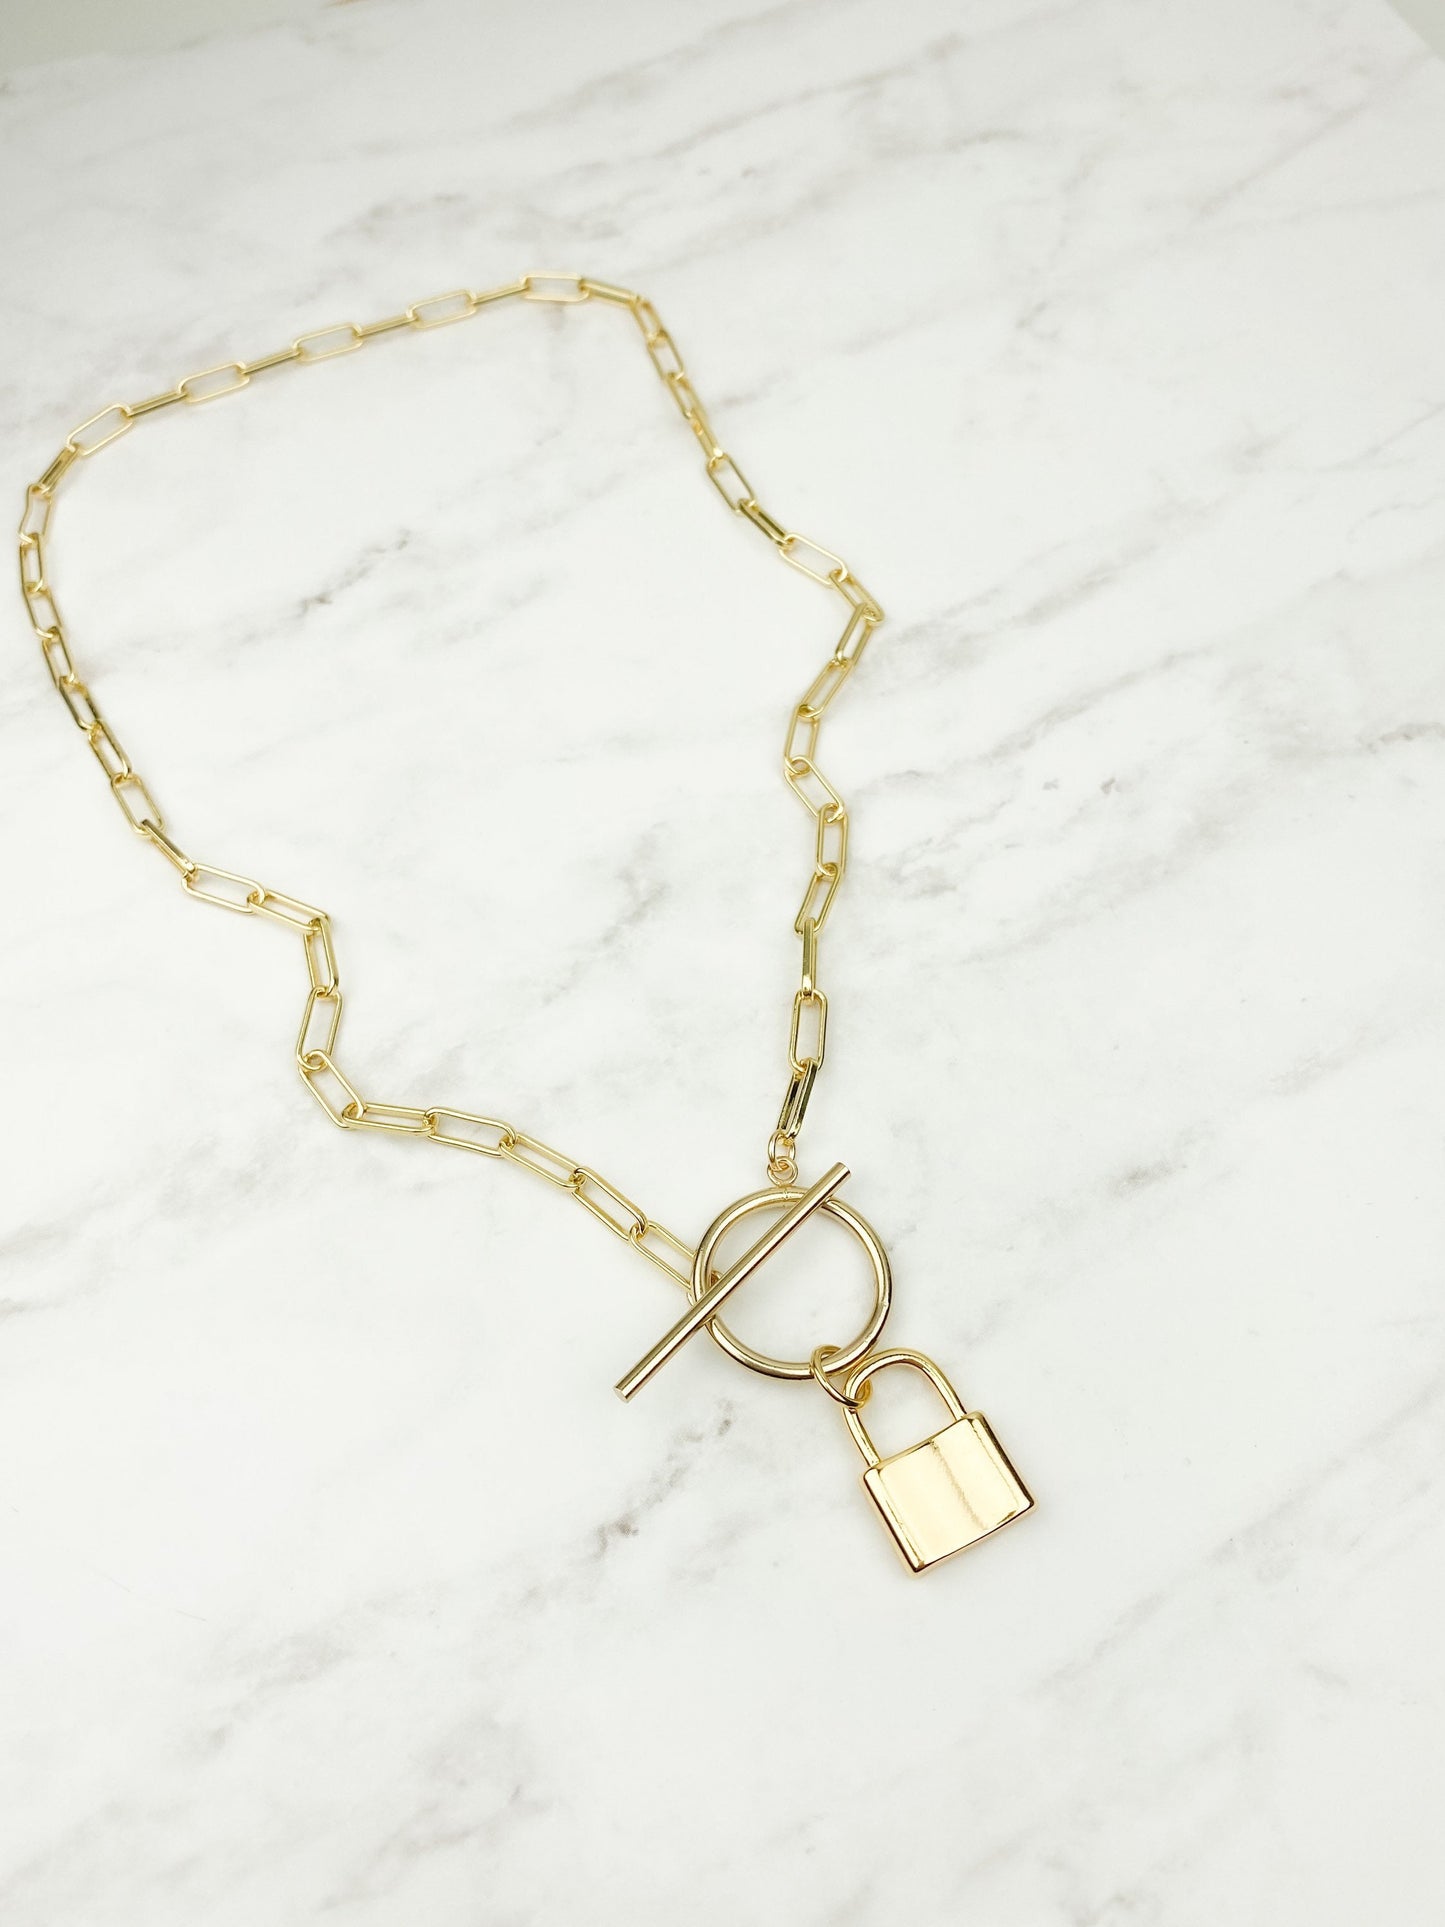 Statement necklace, big chain necklace, padlock necklace, gold filled necklace, necklaces for women, gold filled necklace